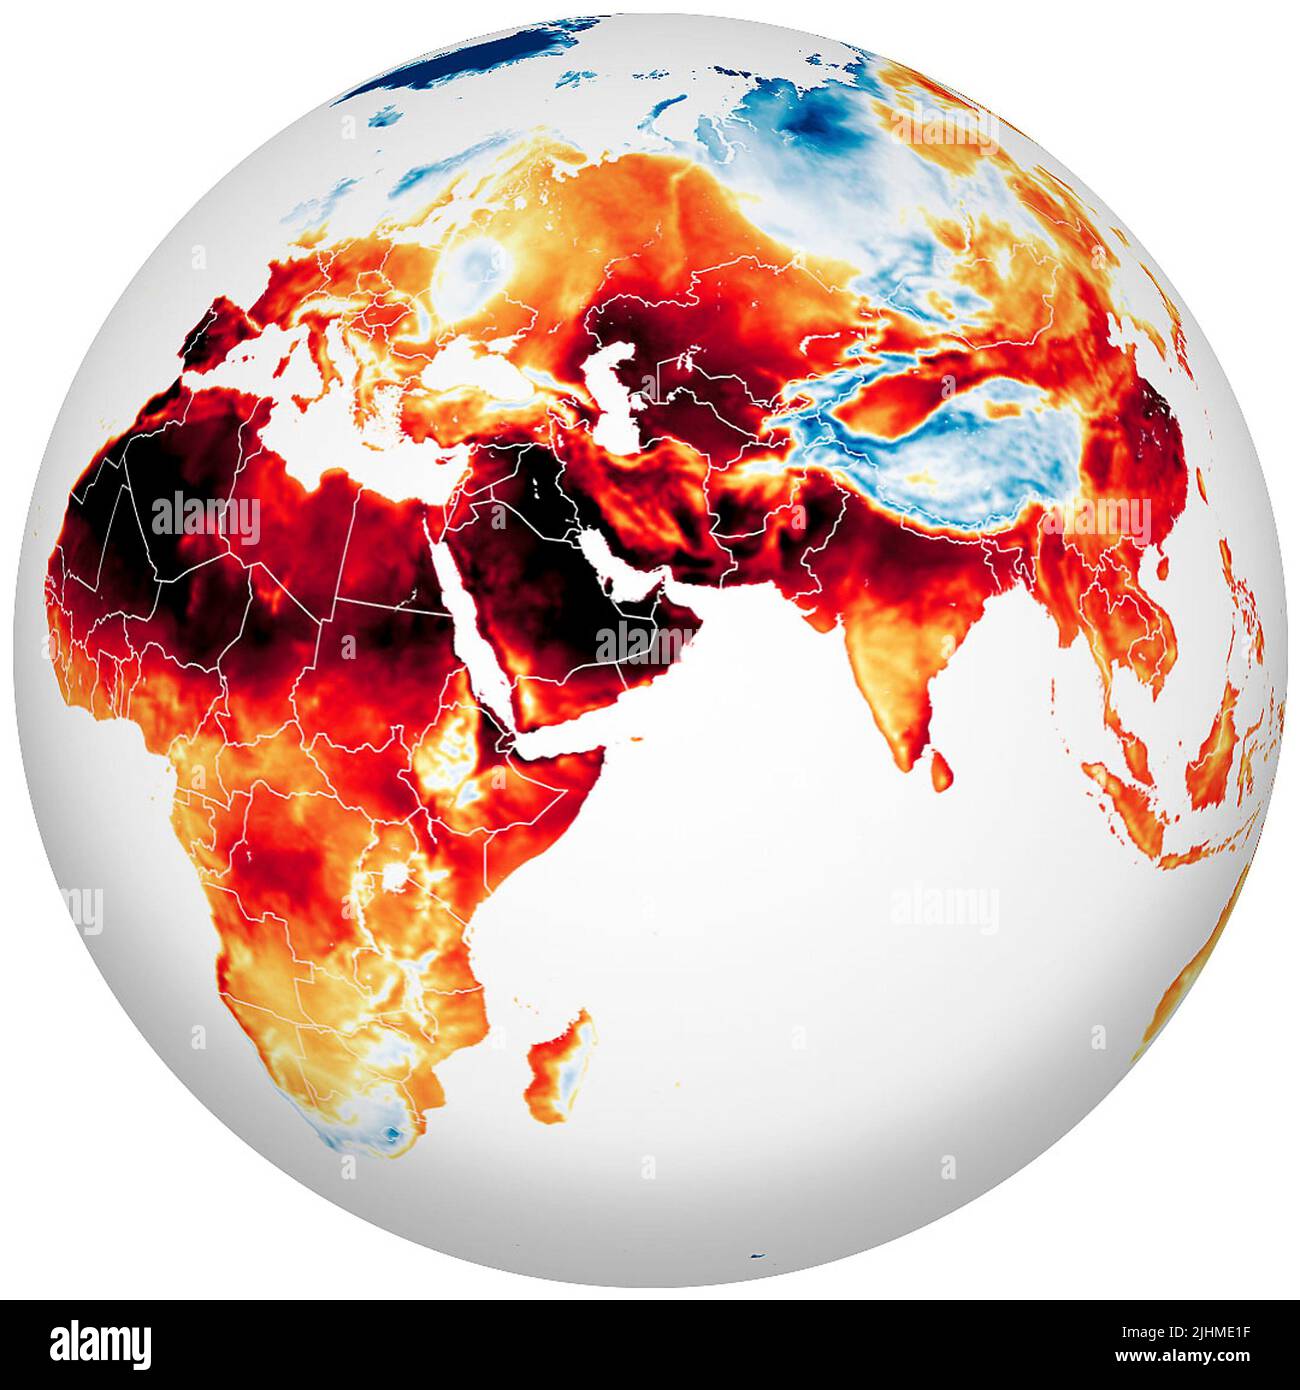 A satellite image showing in shades of red, the surface air temperatures across most of the Eastern Hemisphere taken by the Goddard Earth Observing System, July 13, 2022 In Earth Orbit. In June and July 2022, heatwaves struck Europe, North Africa, the Middle East, and Asia, as temperatures climbed above 40 degrees Celsius (104 degrees Fahrenheit) breaking many long-standing records. Stock Photo